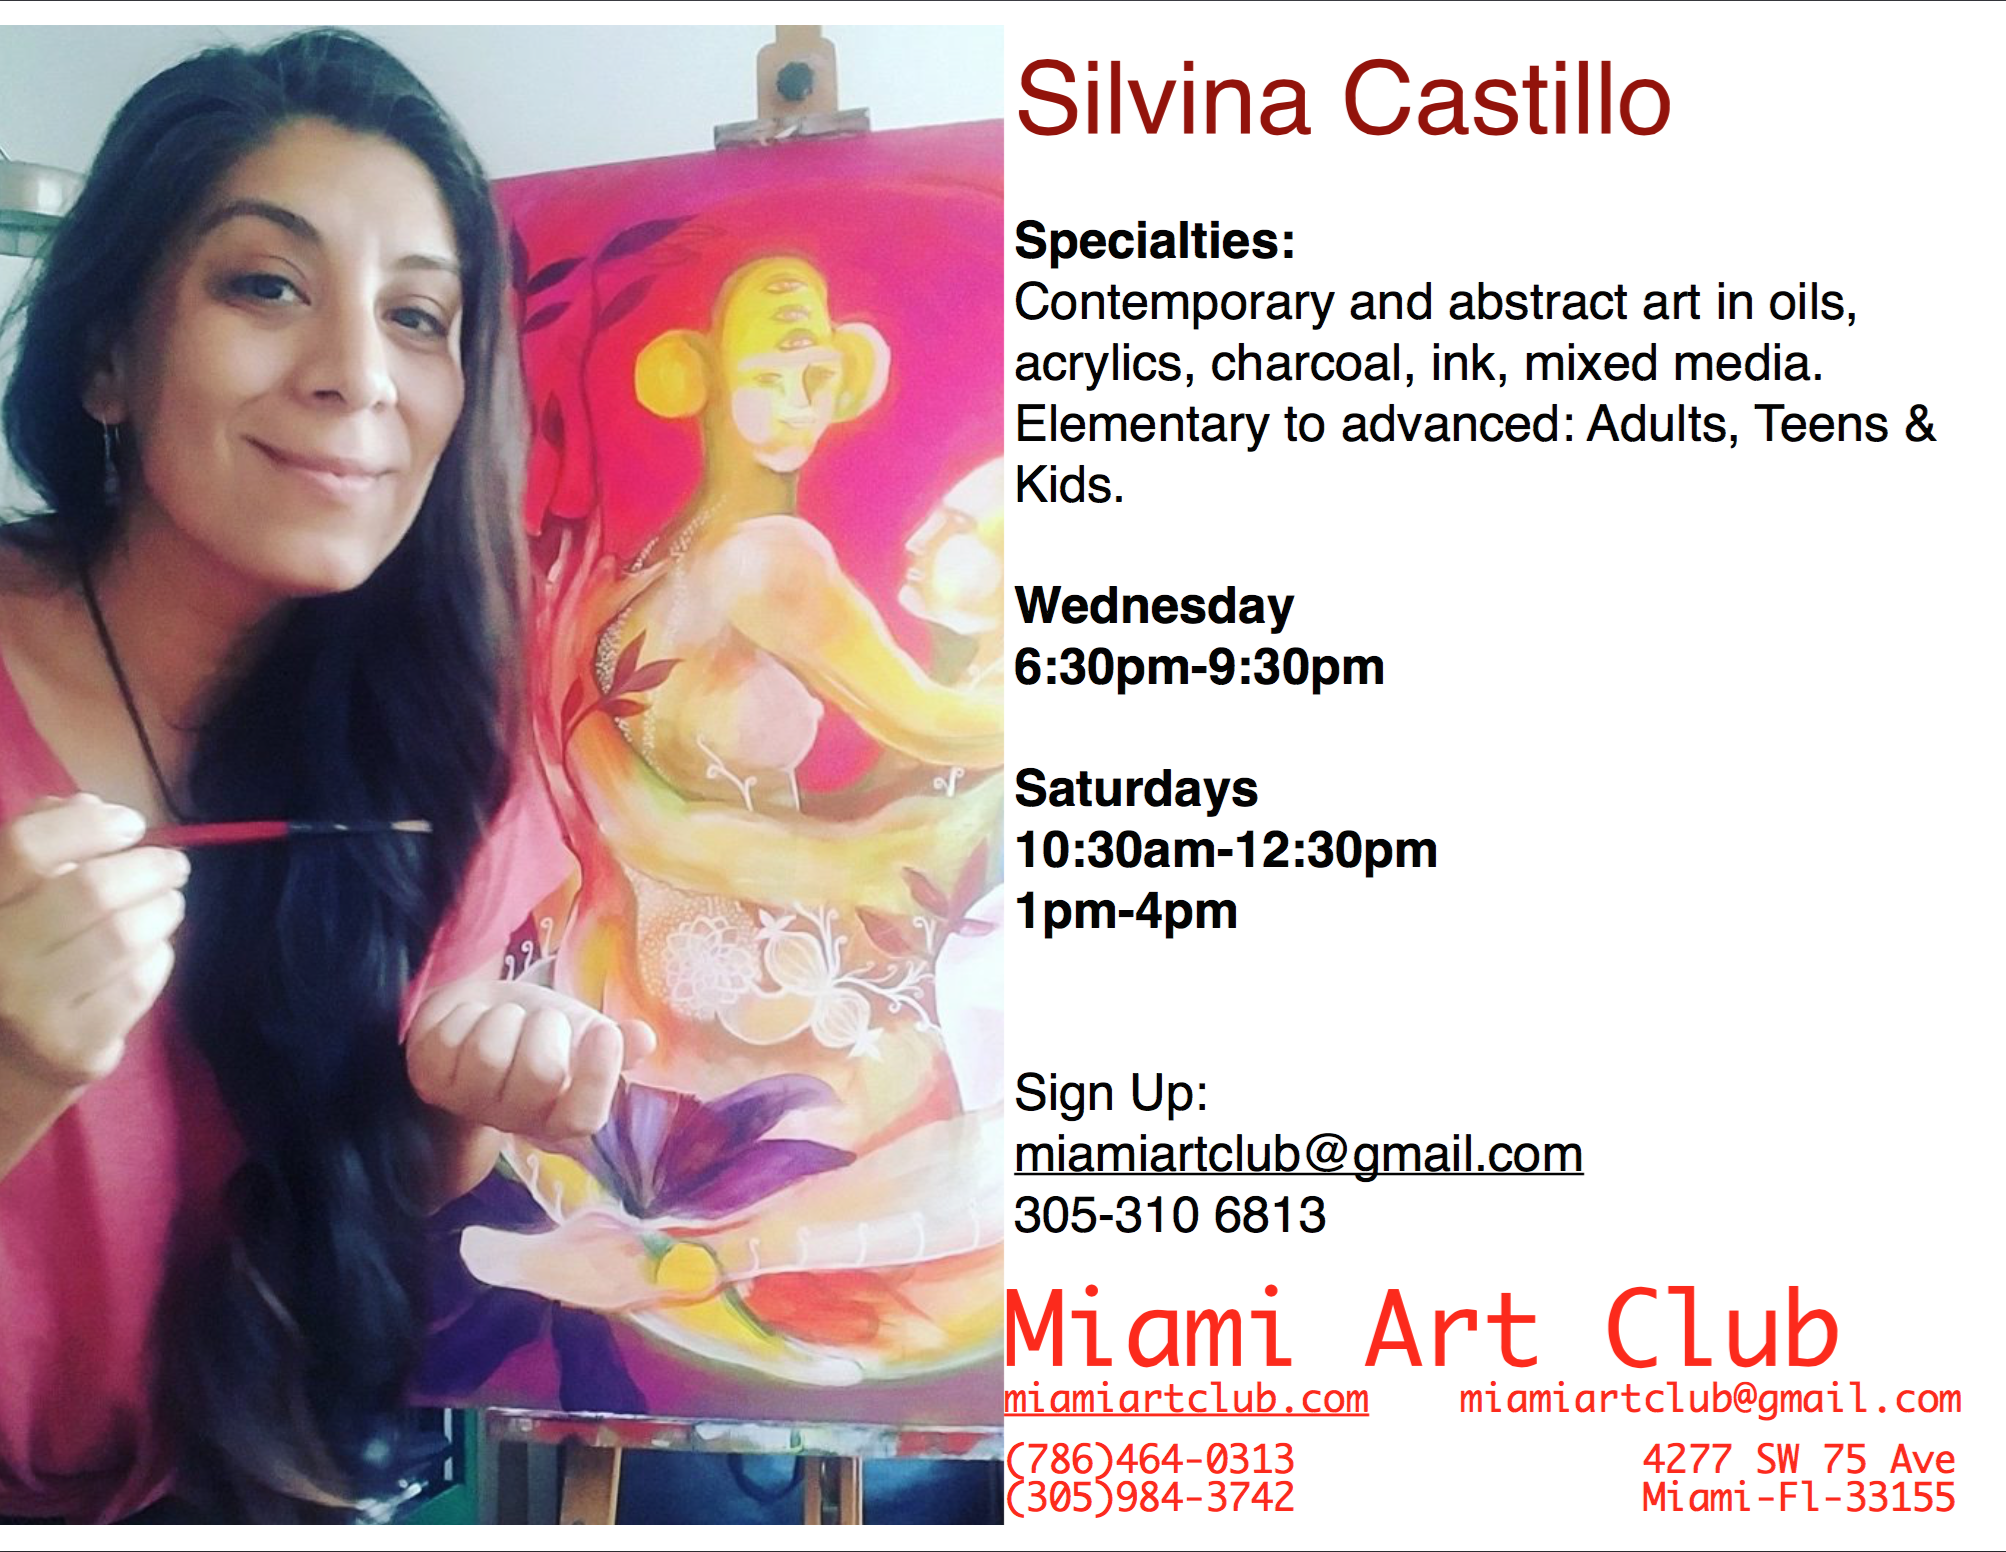 Art Classes, Painting & Drawing with Prof. Silvina Castillo